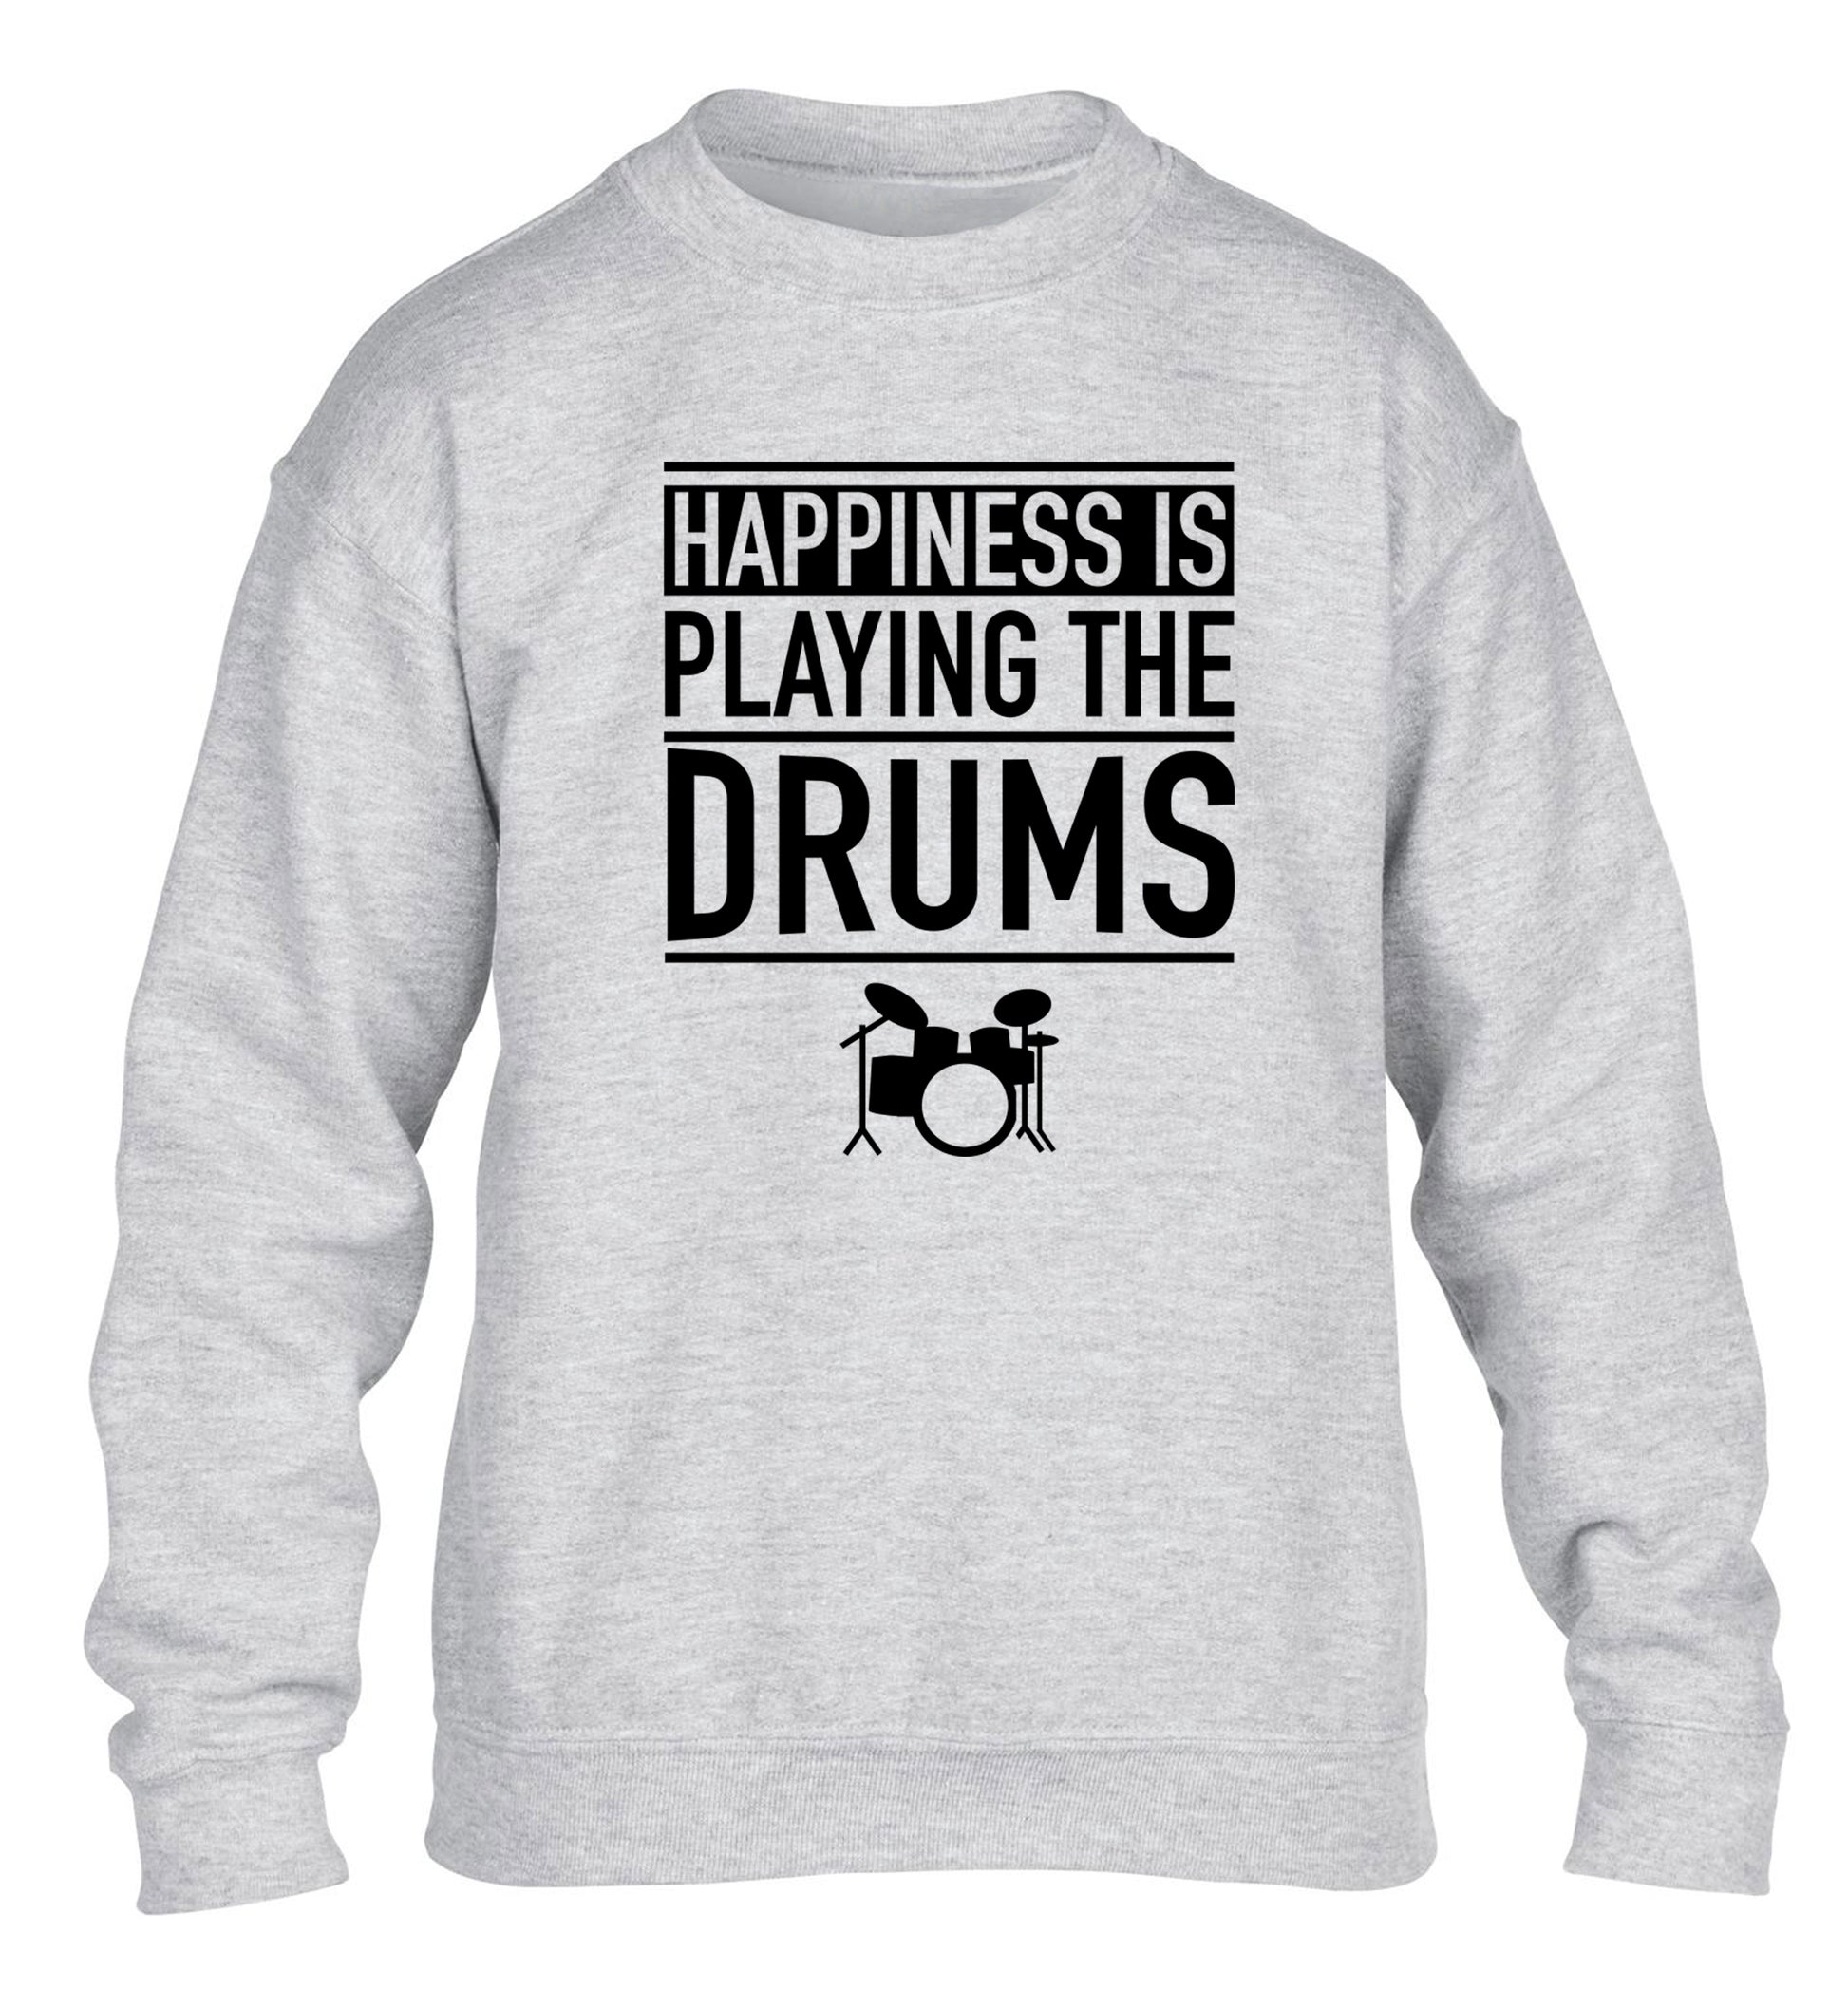 Happiness is playing the drums children's grey sweater 12-14 Years